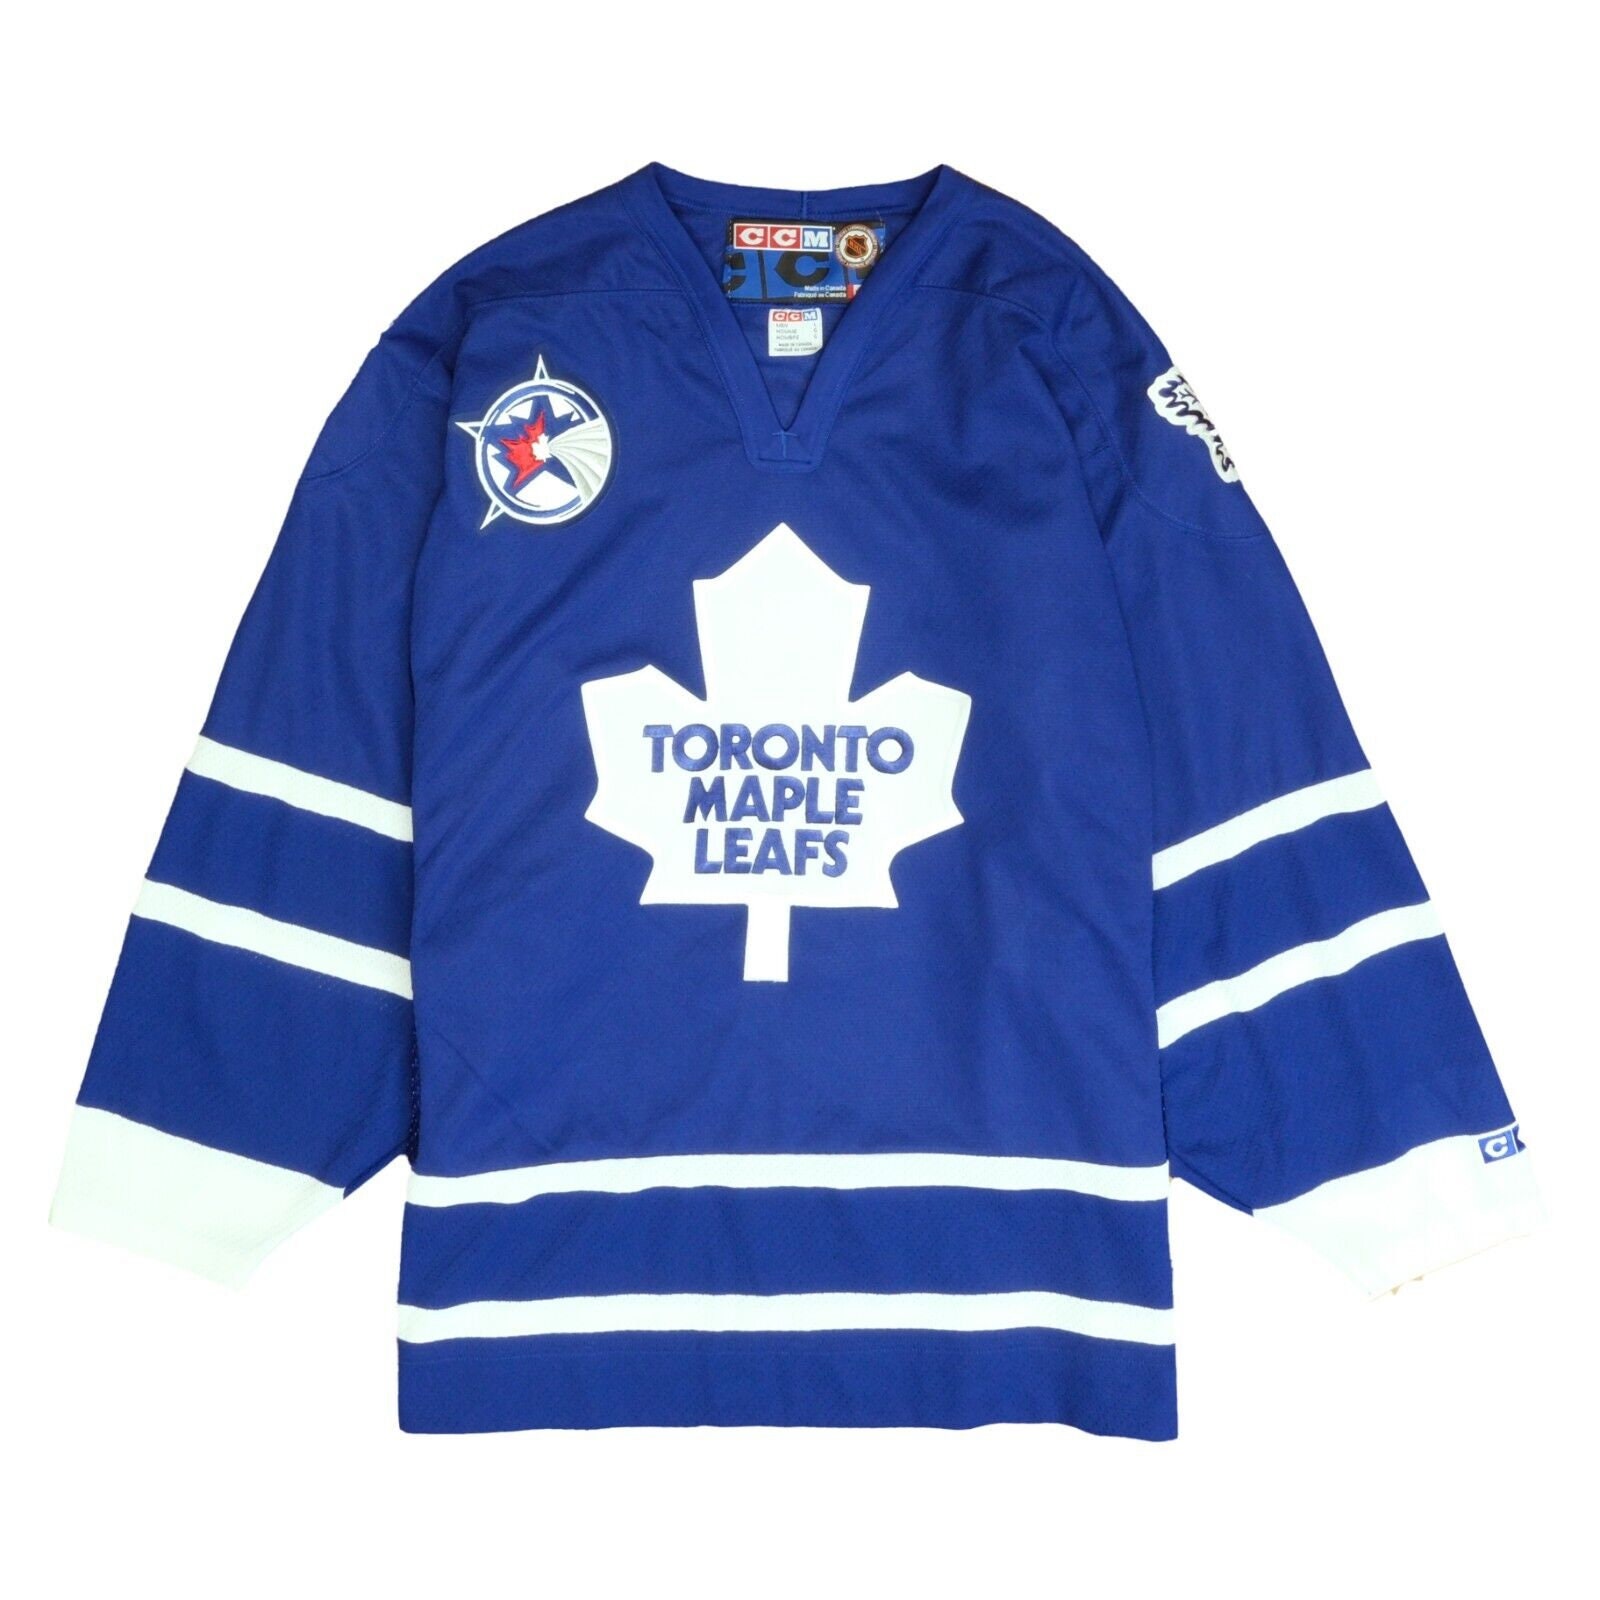 Toronto Maple Leafs Official NHL Reebok Kids Youth Size Camo